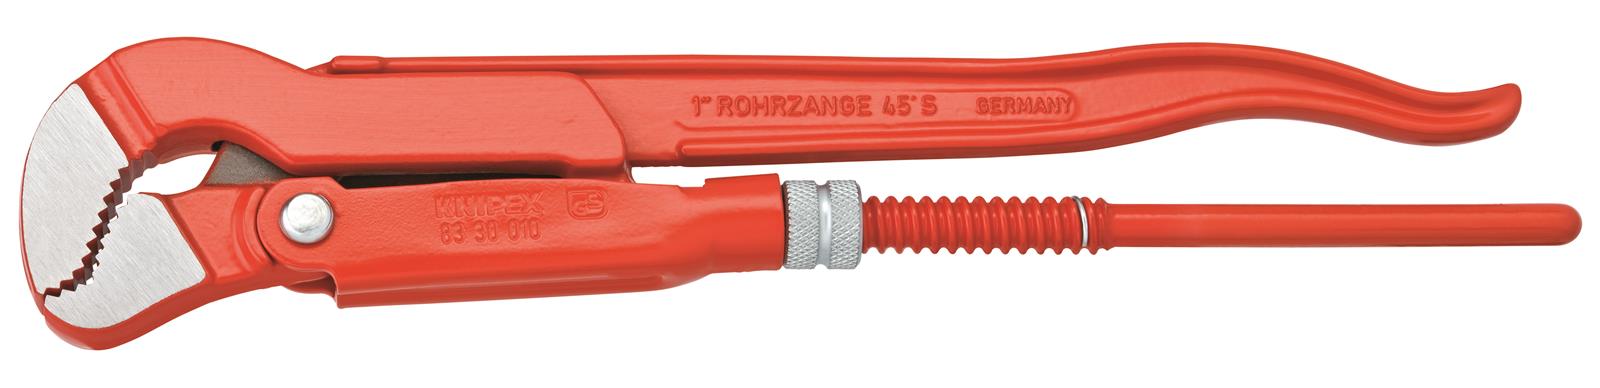 Knipex 83-30-005 9.6" Pipe Wrench S-Type